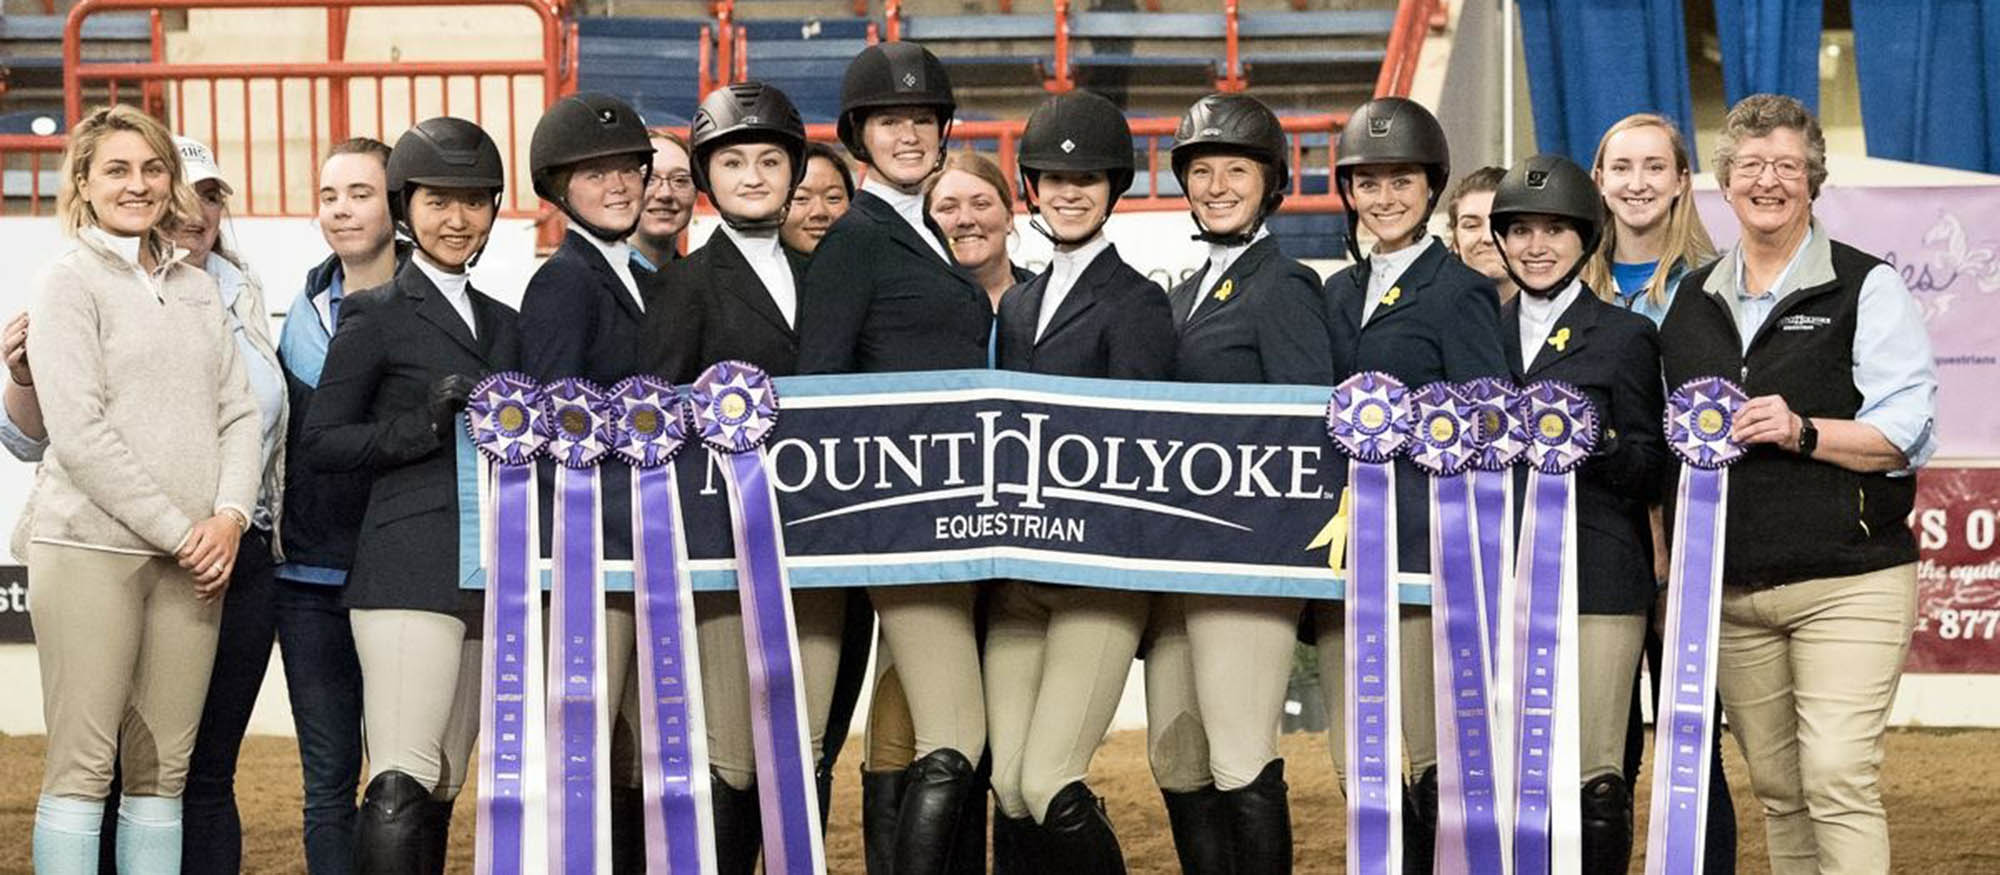 Photo of the Lyons riding team at Nationals 2018. Picture courtesy of Tricia Booker, USHJA